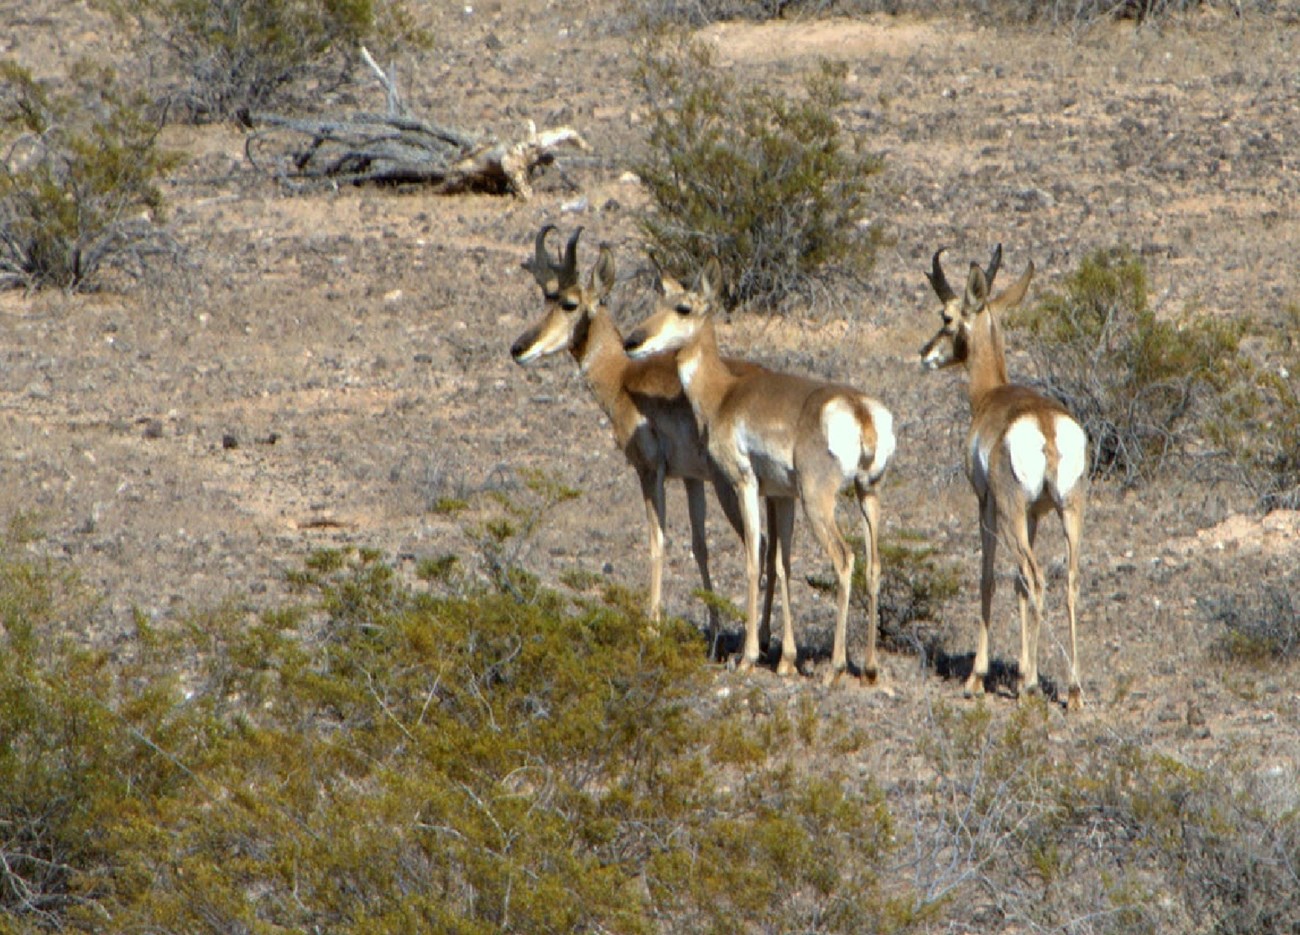 Three Sonoran pronghorn look out across the shrubland. Two of the animals have horns.